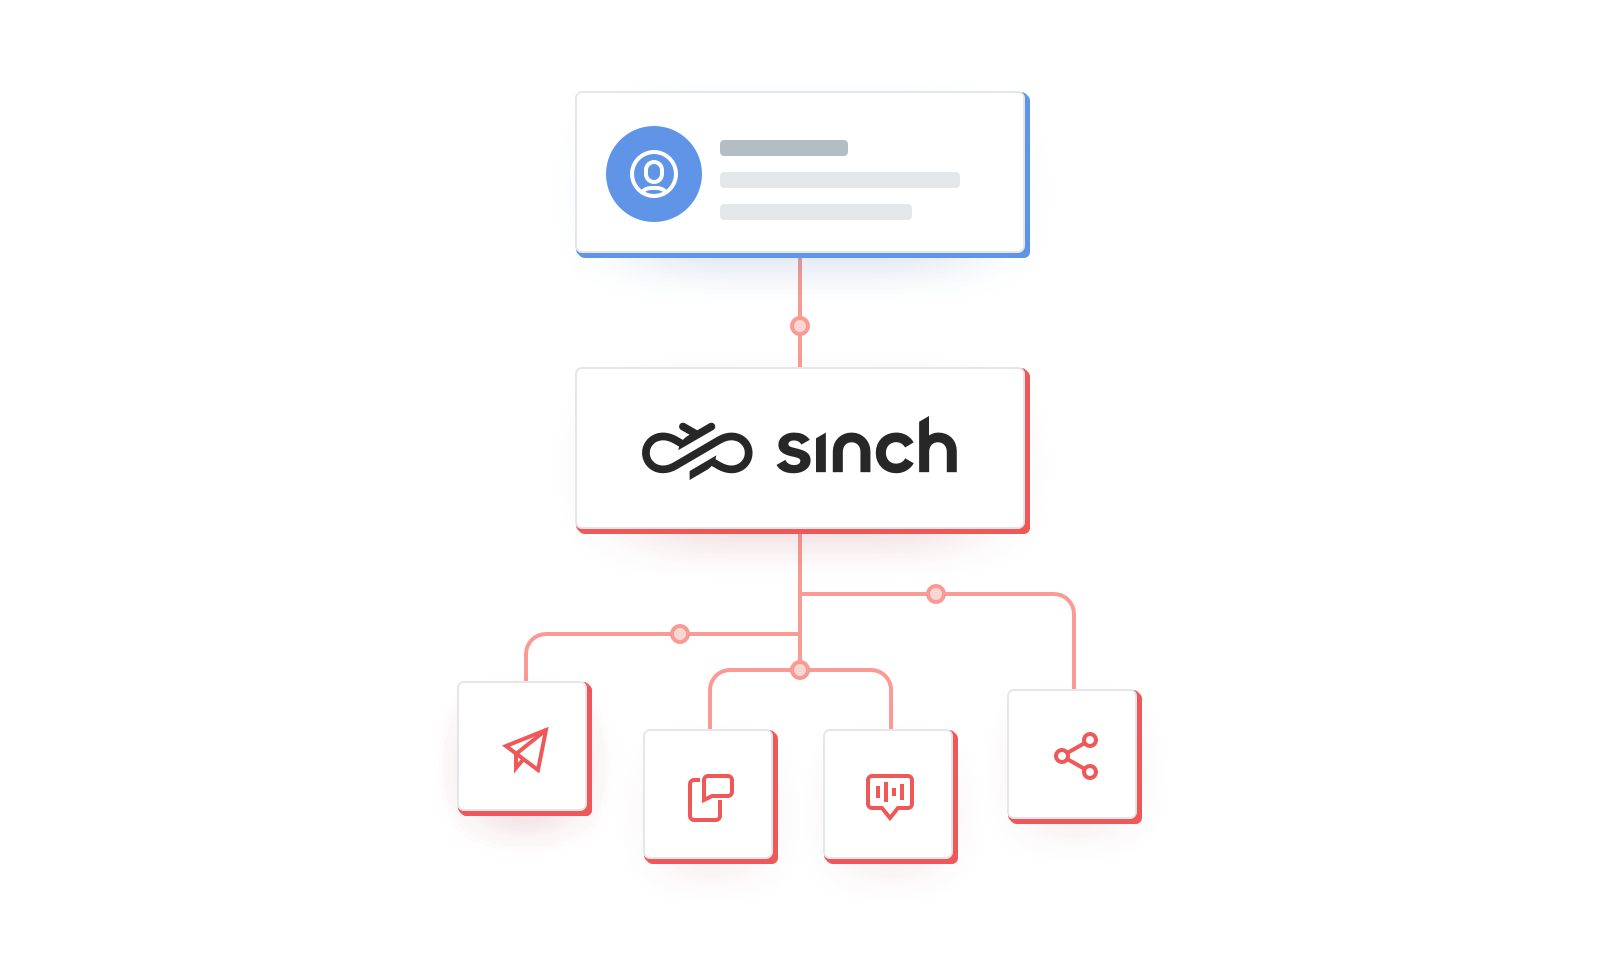 Sinch Email connections.